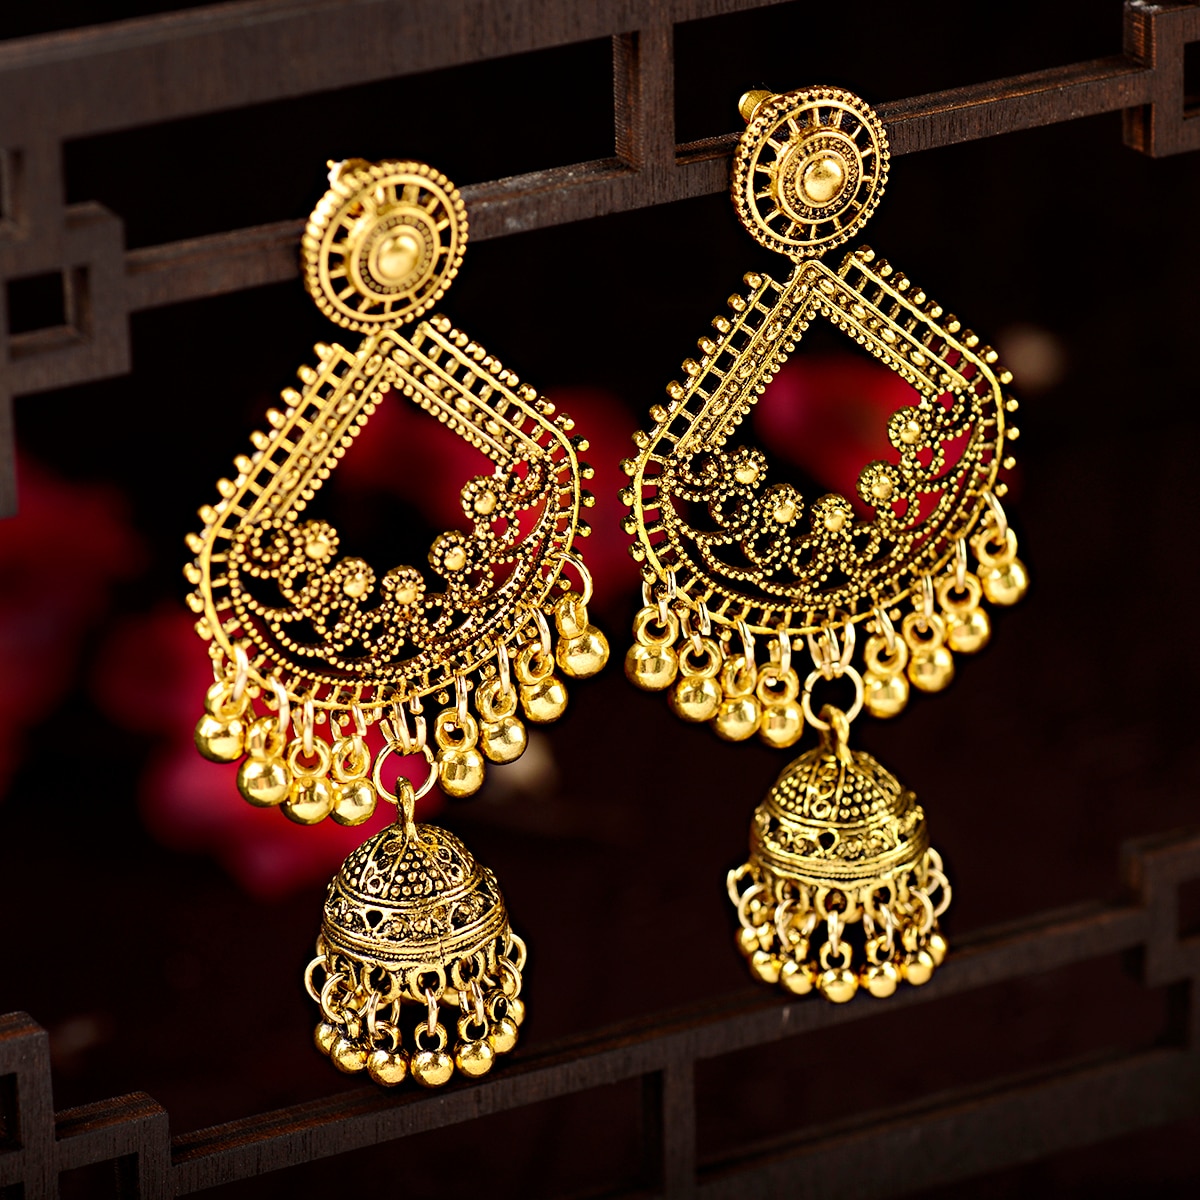 12-PairsLot-Boho-Afghan-Ethnic-Earrings-For-Women-Pendient-Pink-Gold-Silver-Color-Bell-Ladies-Indian-3256803995211369-6